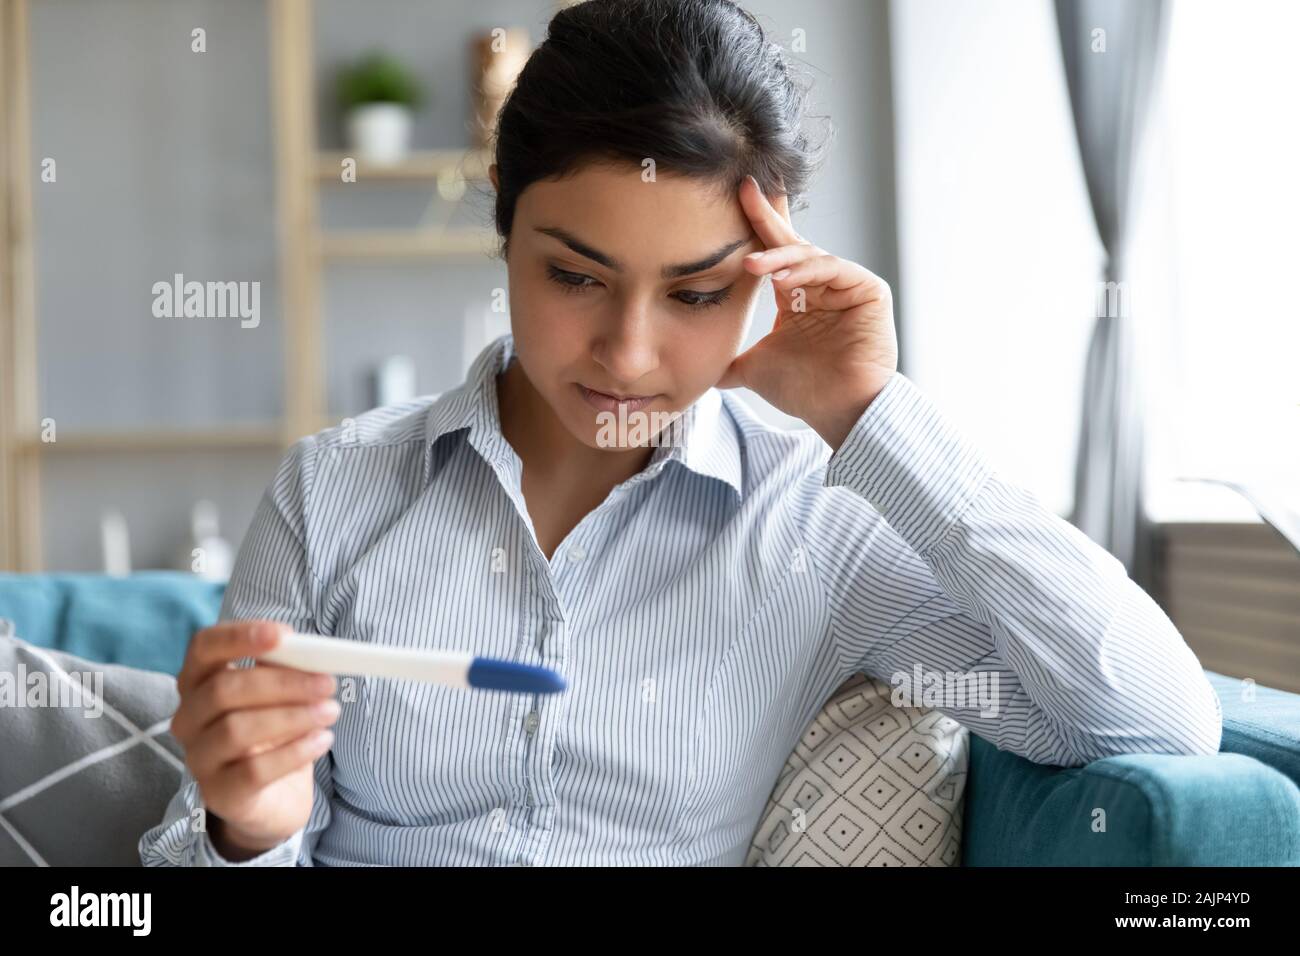 Worried young infertile indian woman holding pregnancy test Stock Photo